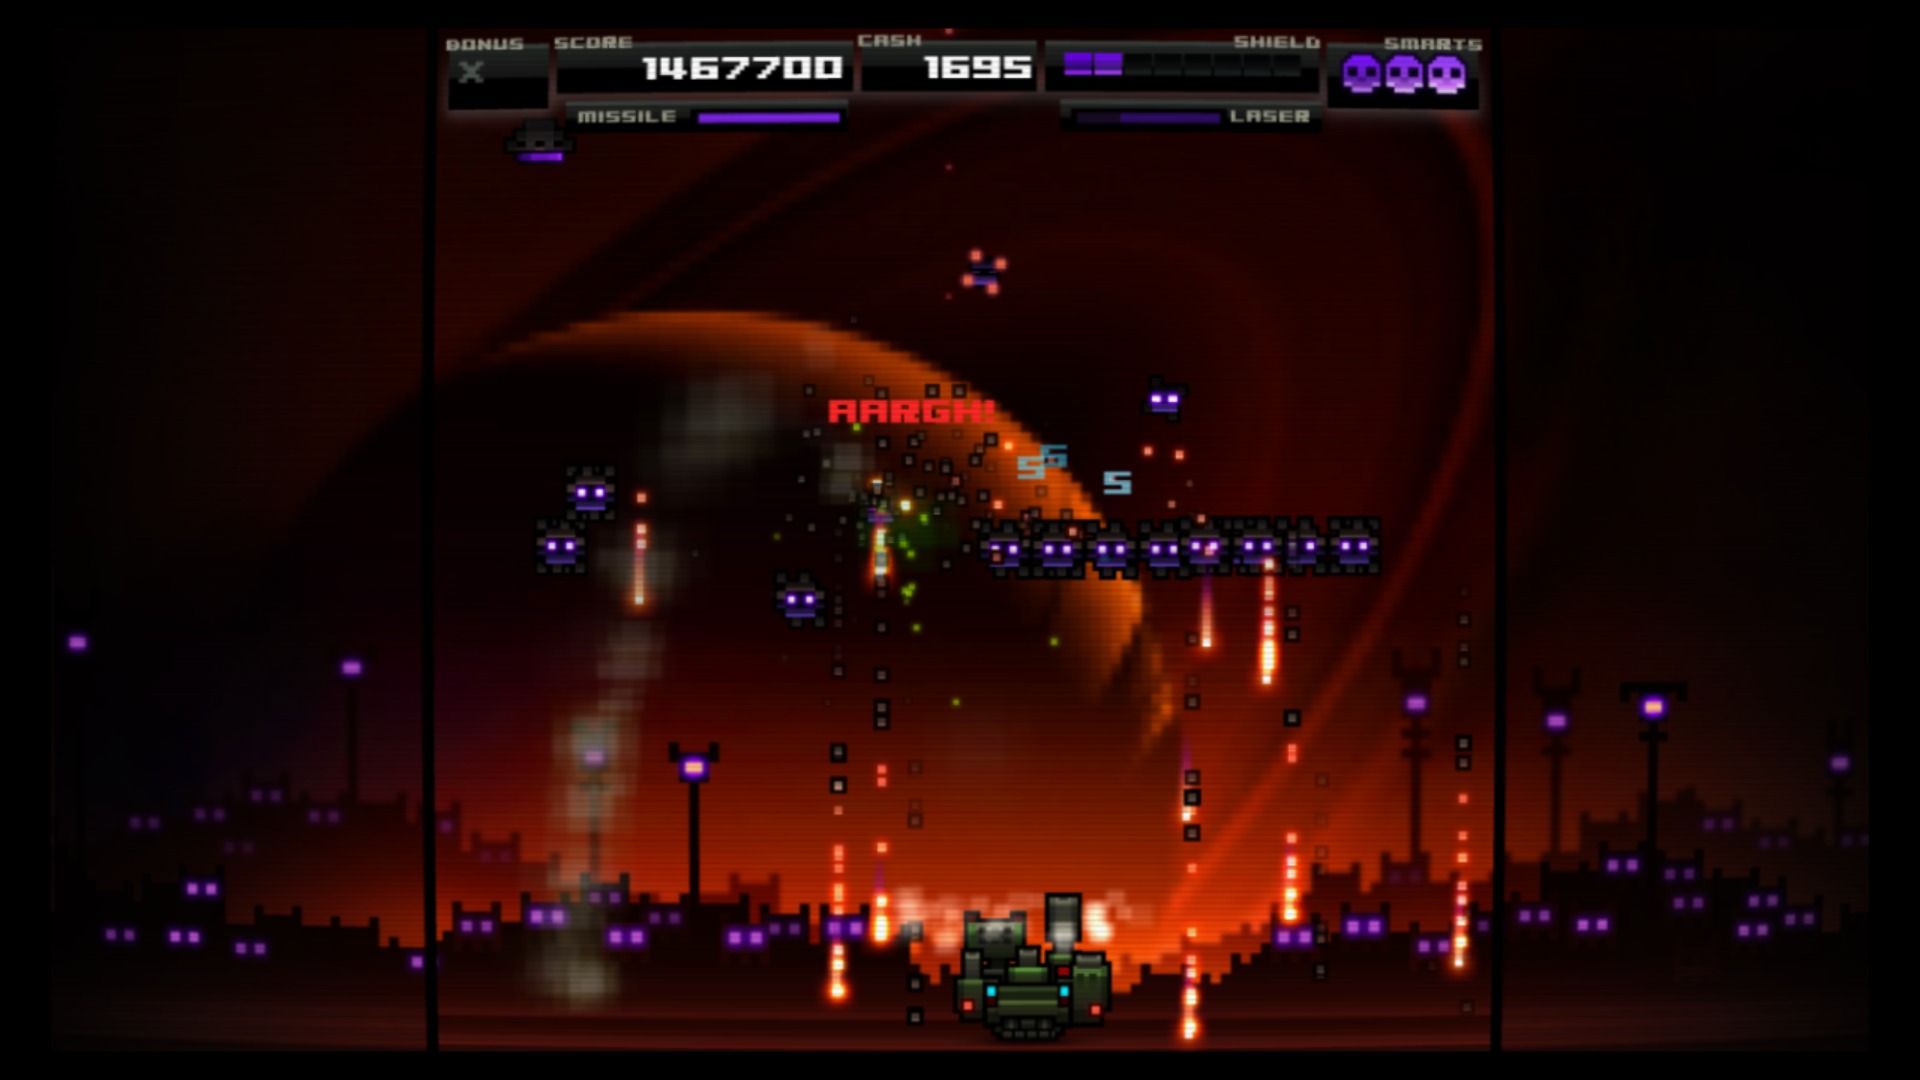 Titan Attacks!' later levels are an endless stream of neon gunfire and cat-like reactions.